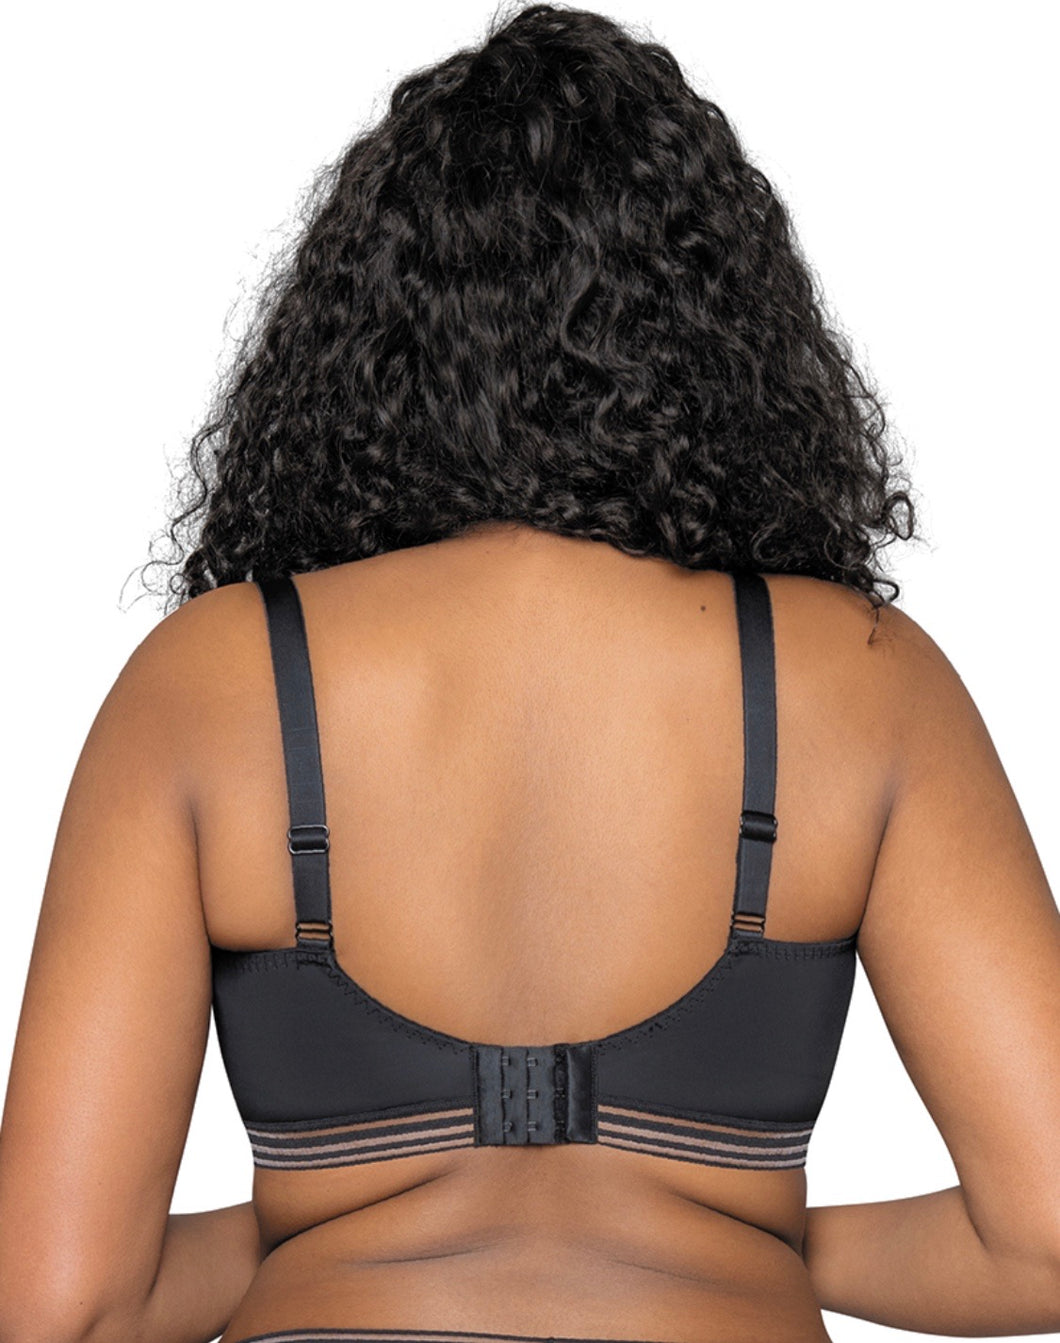 Everything you need to know about Curvy Kate's $11 Bralette Black